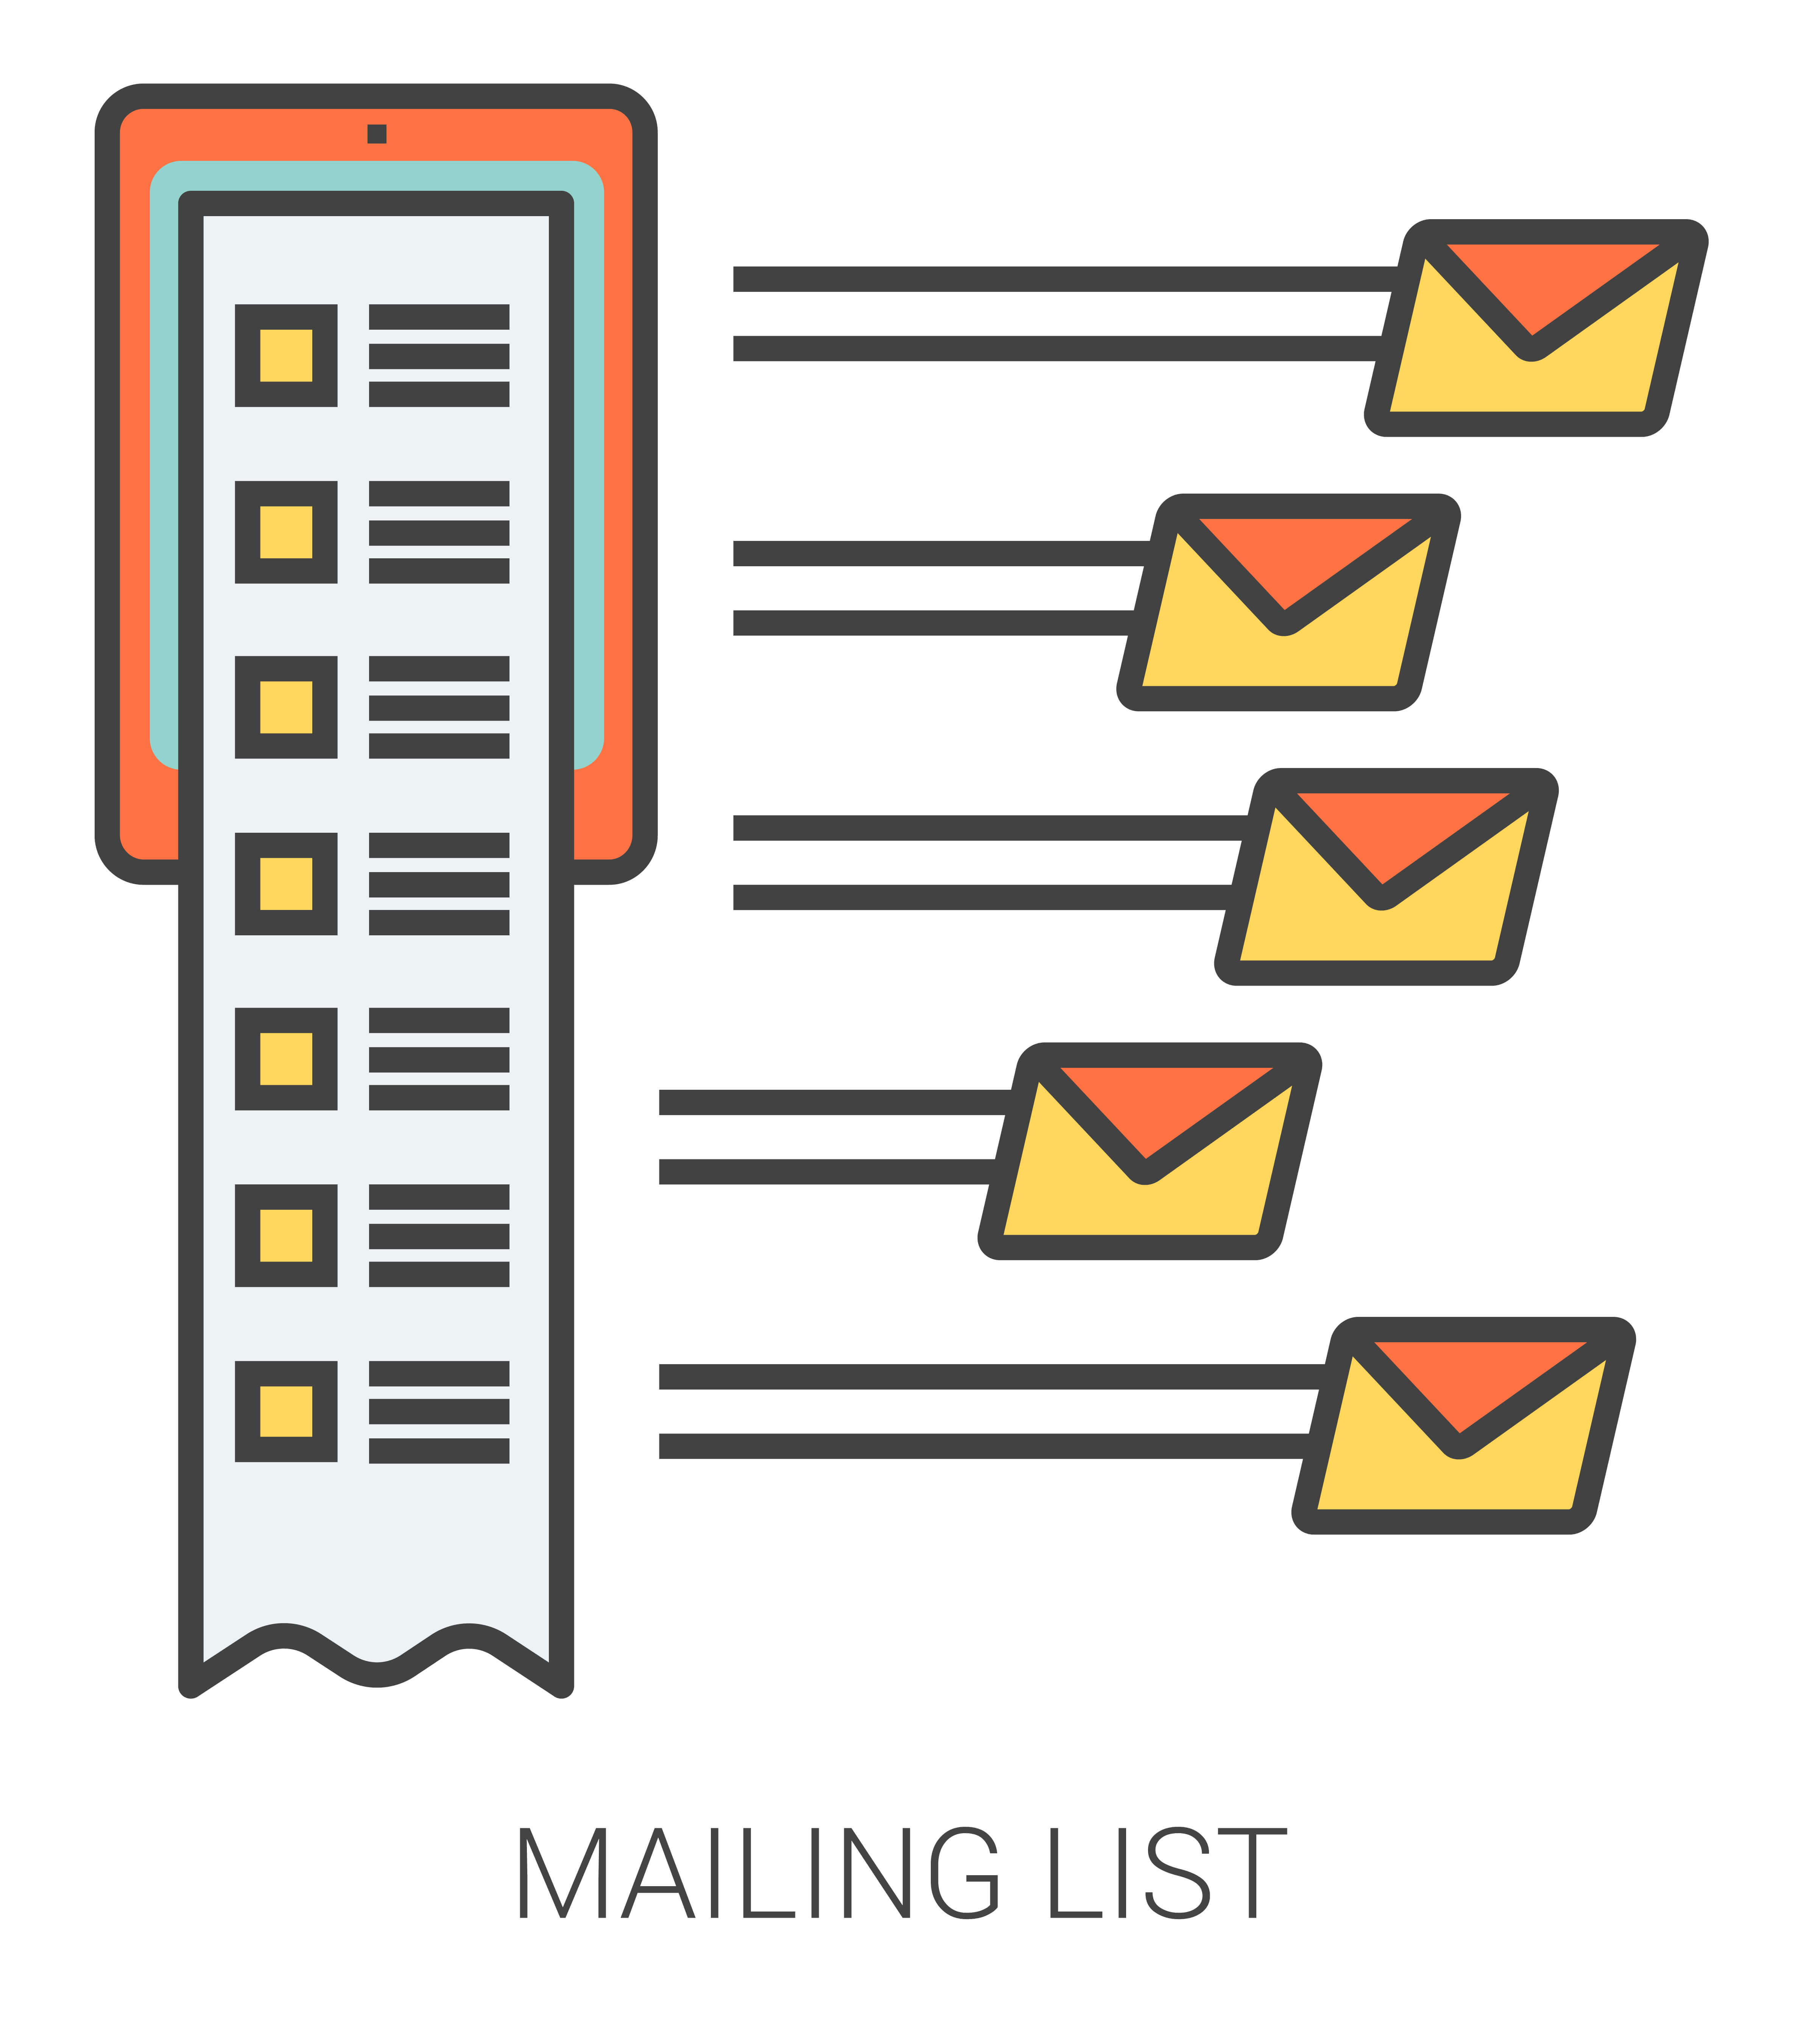 Mailing lists are the lifeblood of your direct mail